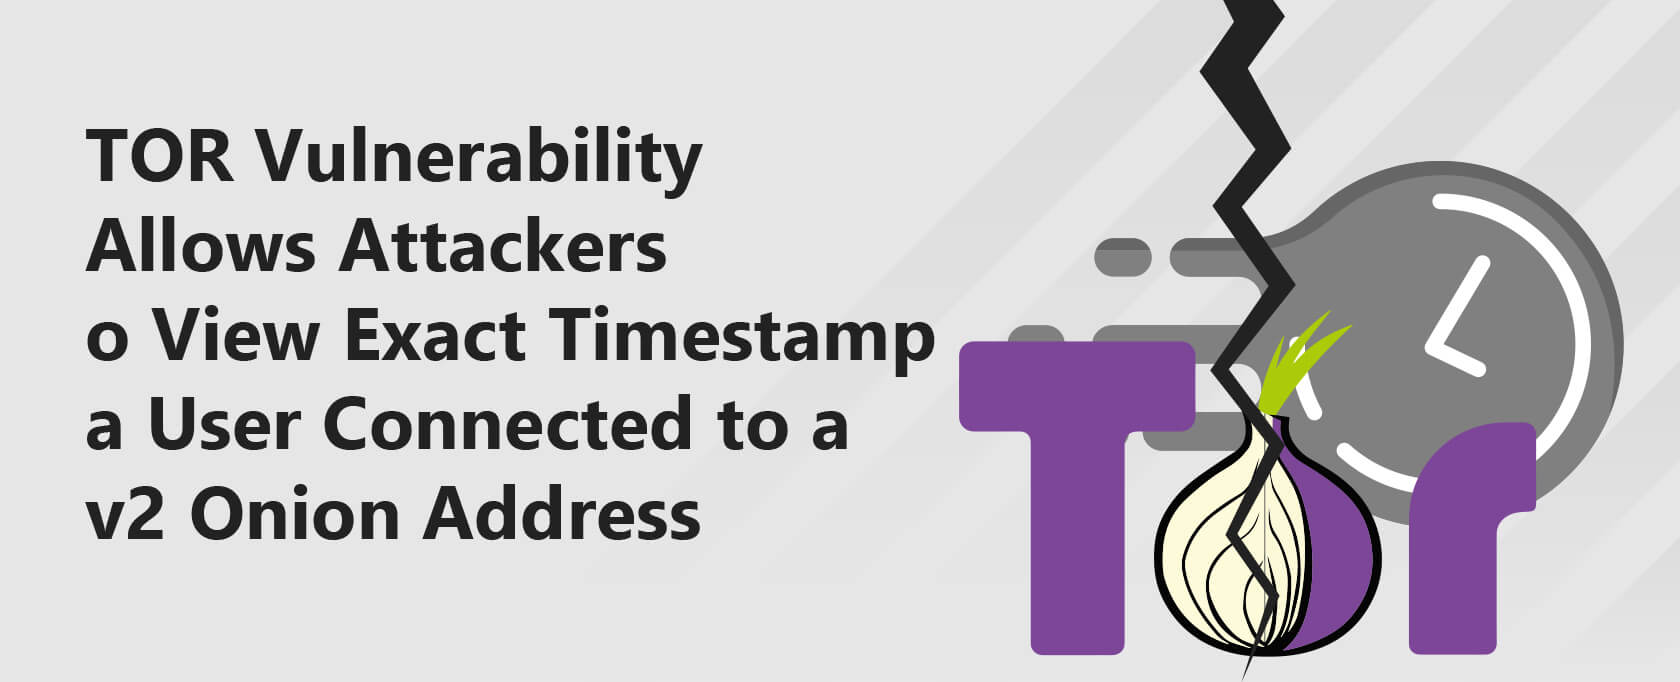 TOR Vulnerability Allows Attackers to View Exact Timestamp a User Connected to a v2 Onion Address